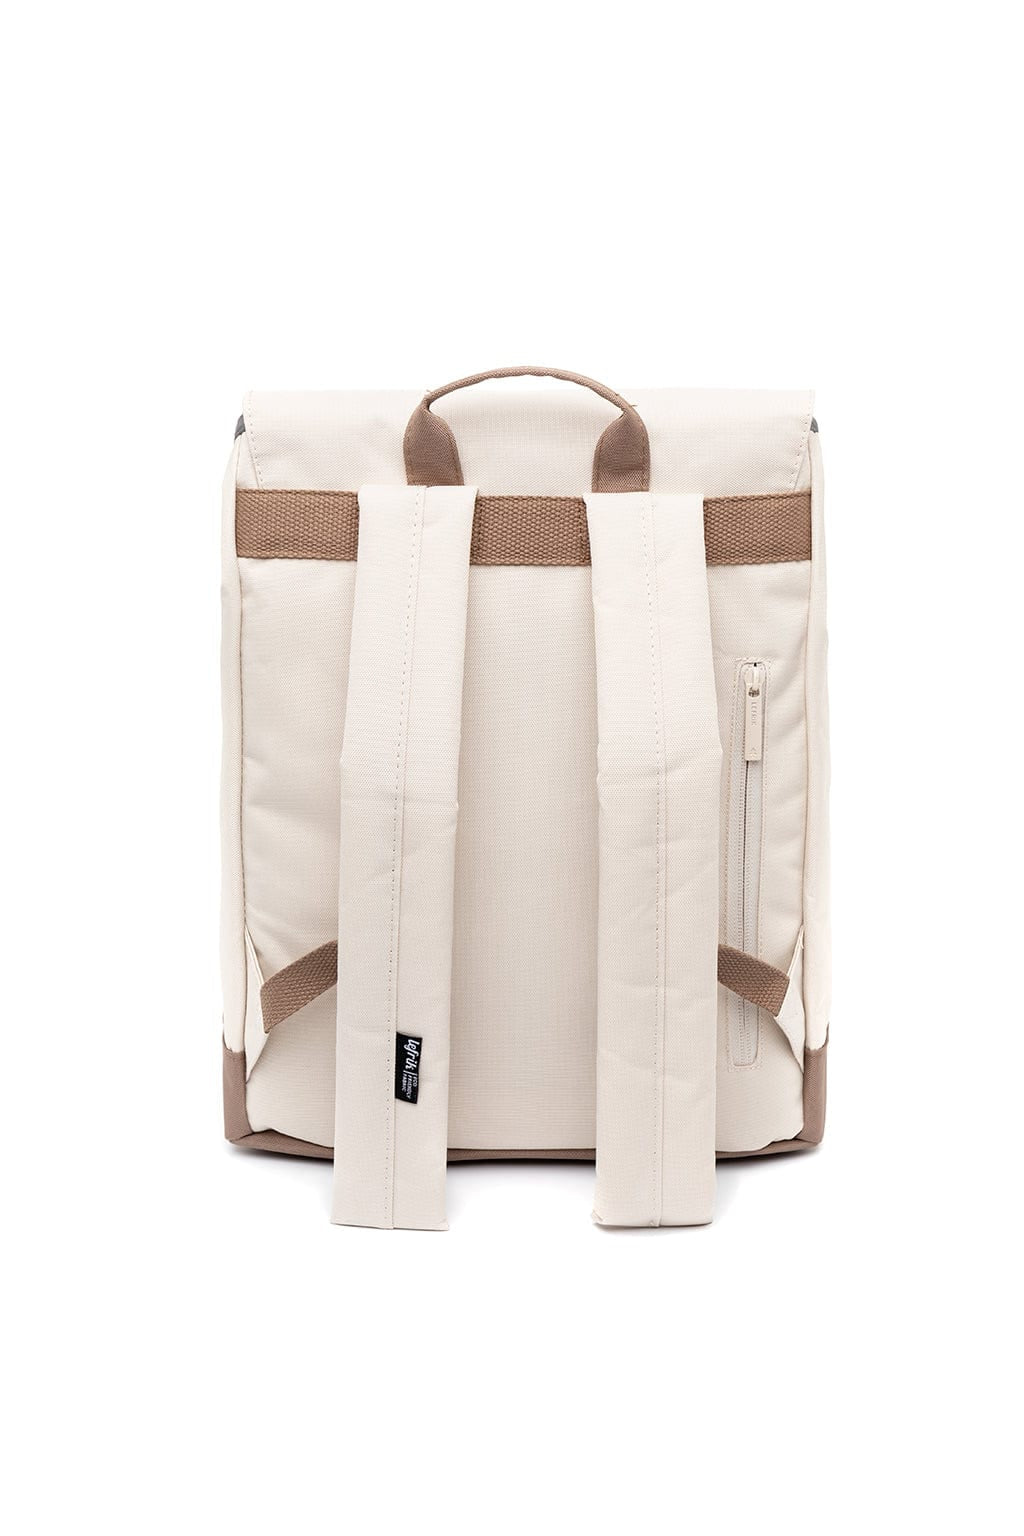 Lefrik Scout Backpack-Accessories-Ohh! By Gum - Shop Sustainable